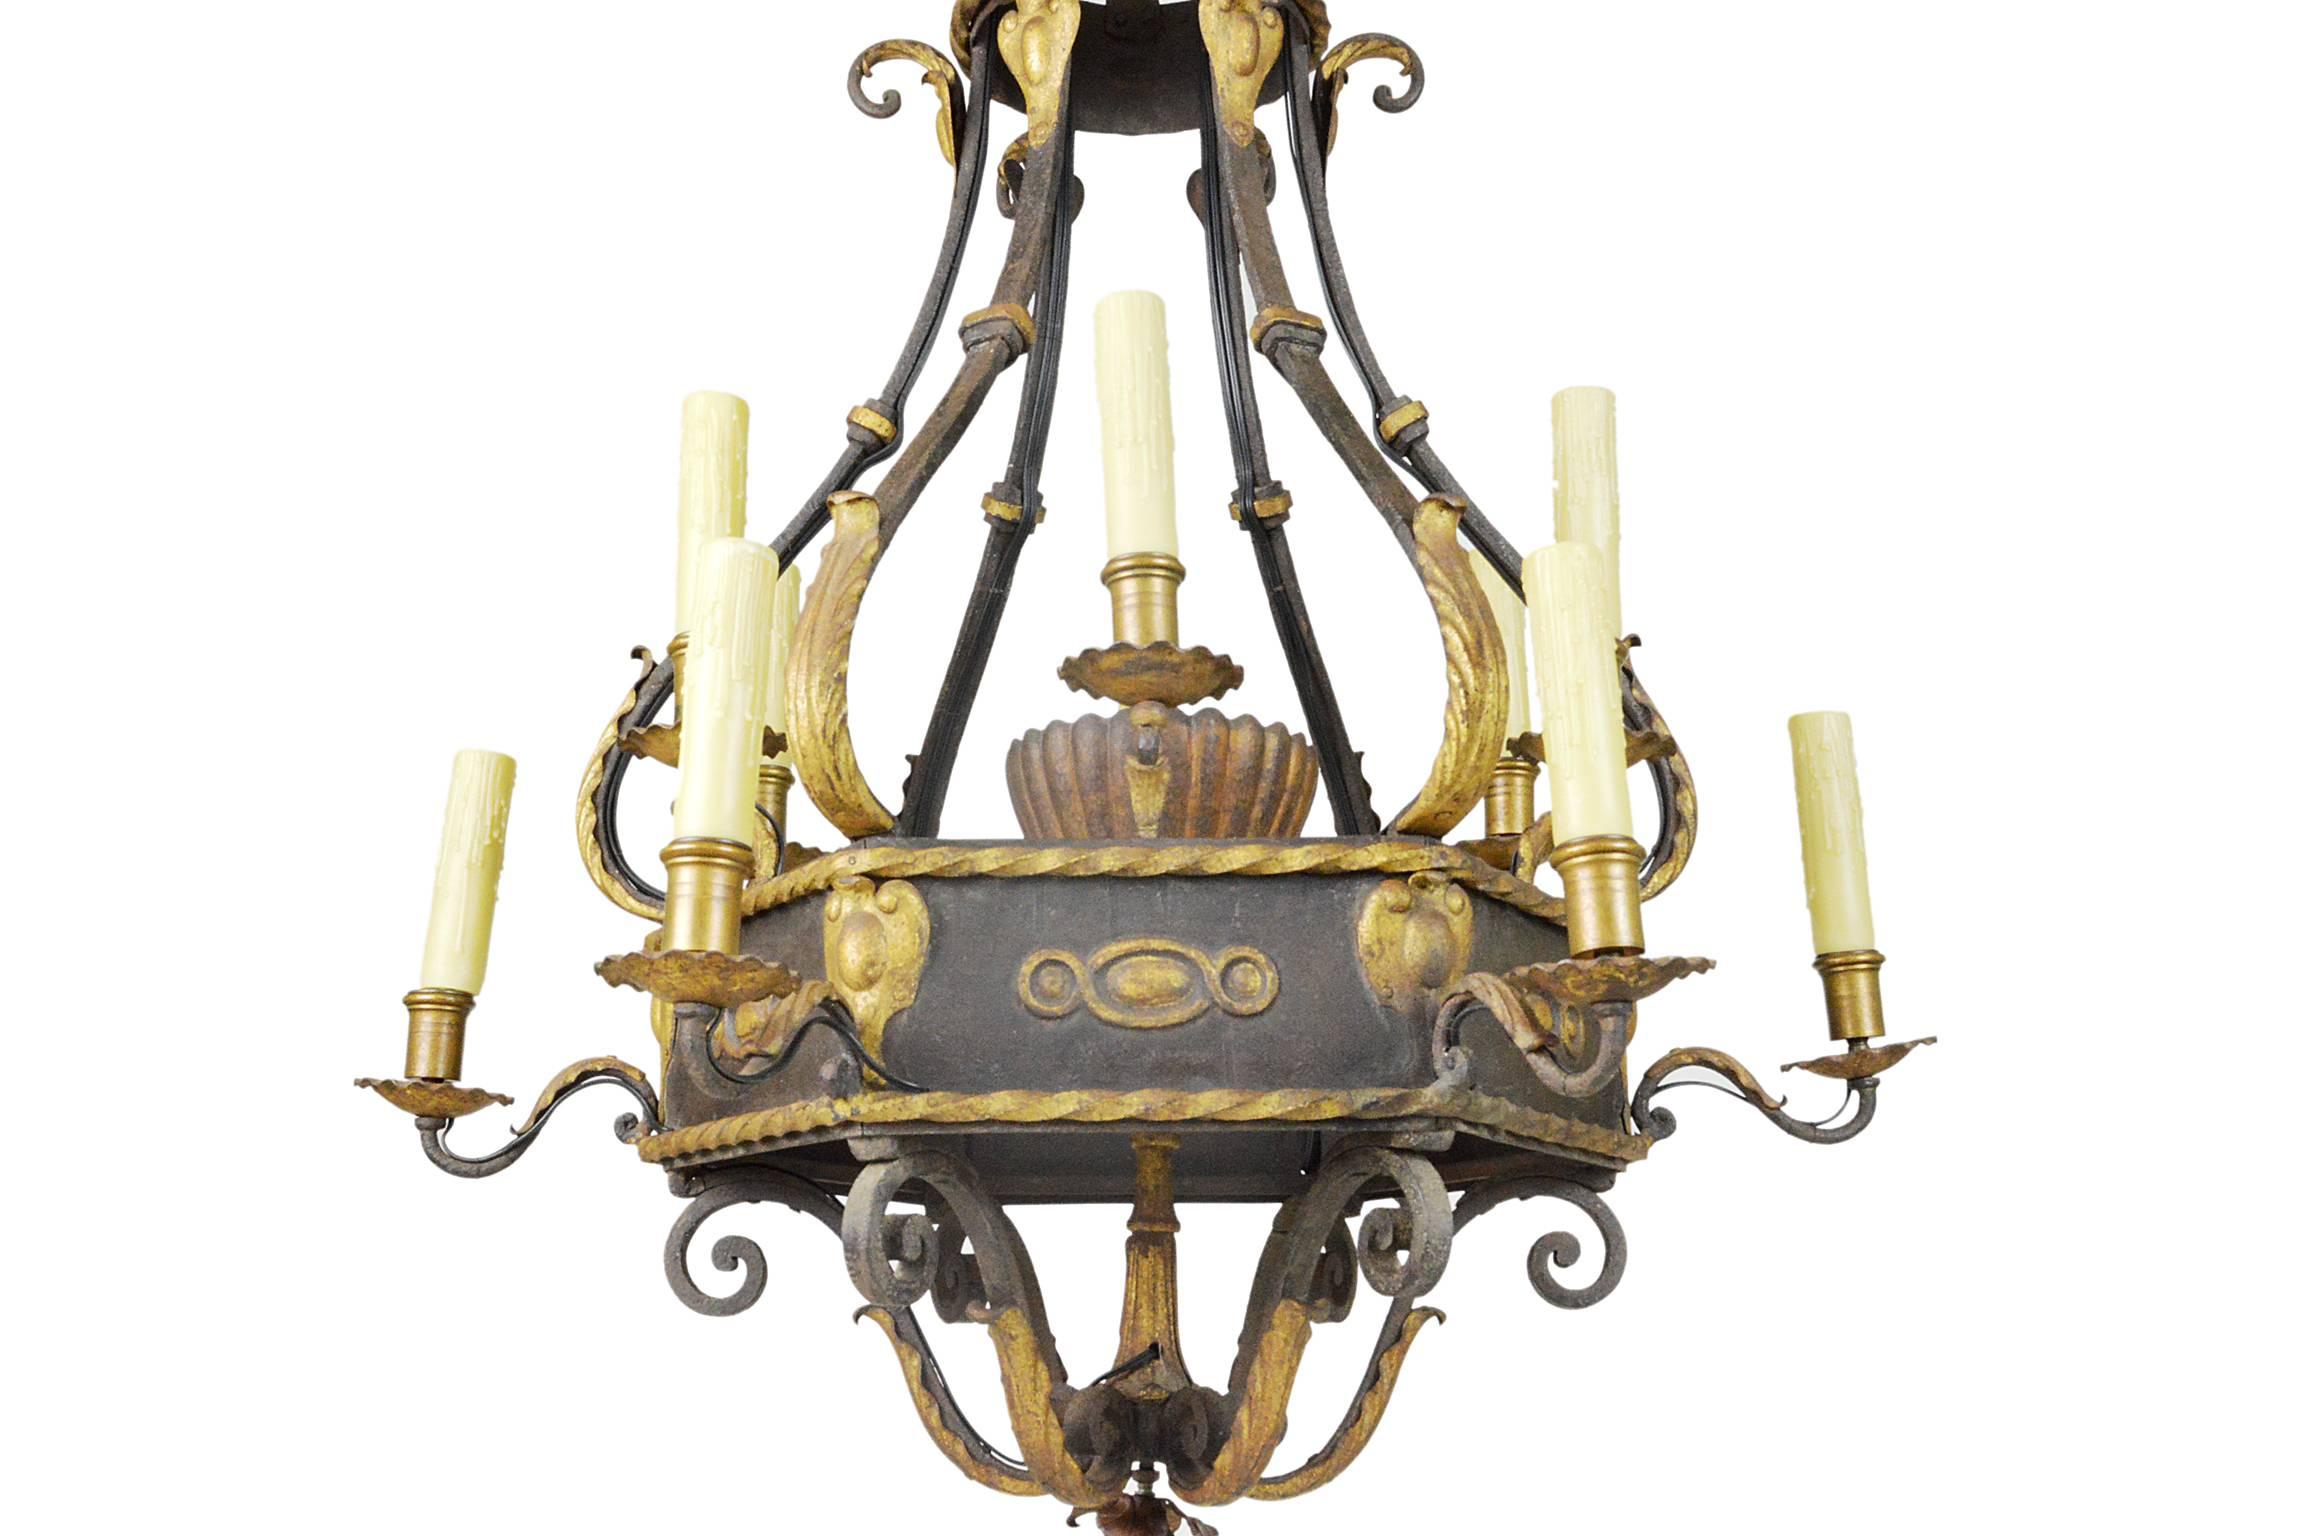 Monumental French iron parcel-gilt ten-light chandelier having crown form top. Excellent condition, recently re-wired, maintaining its original patina throughout.